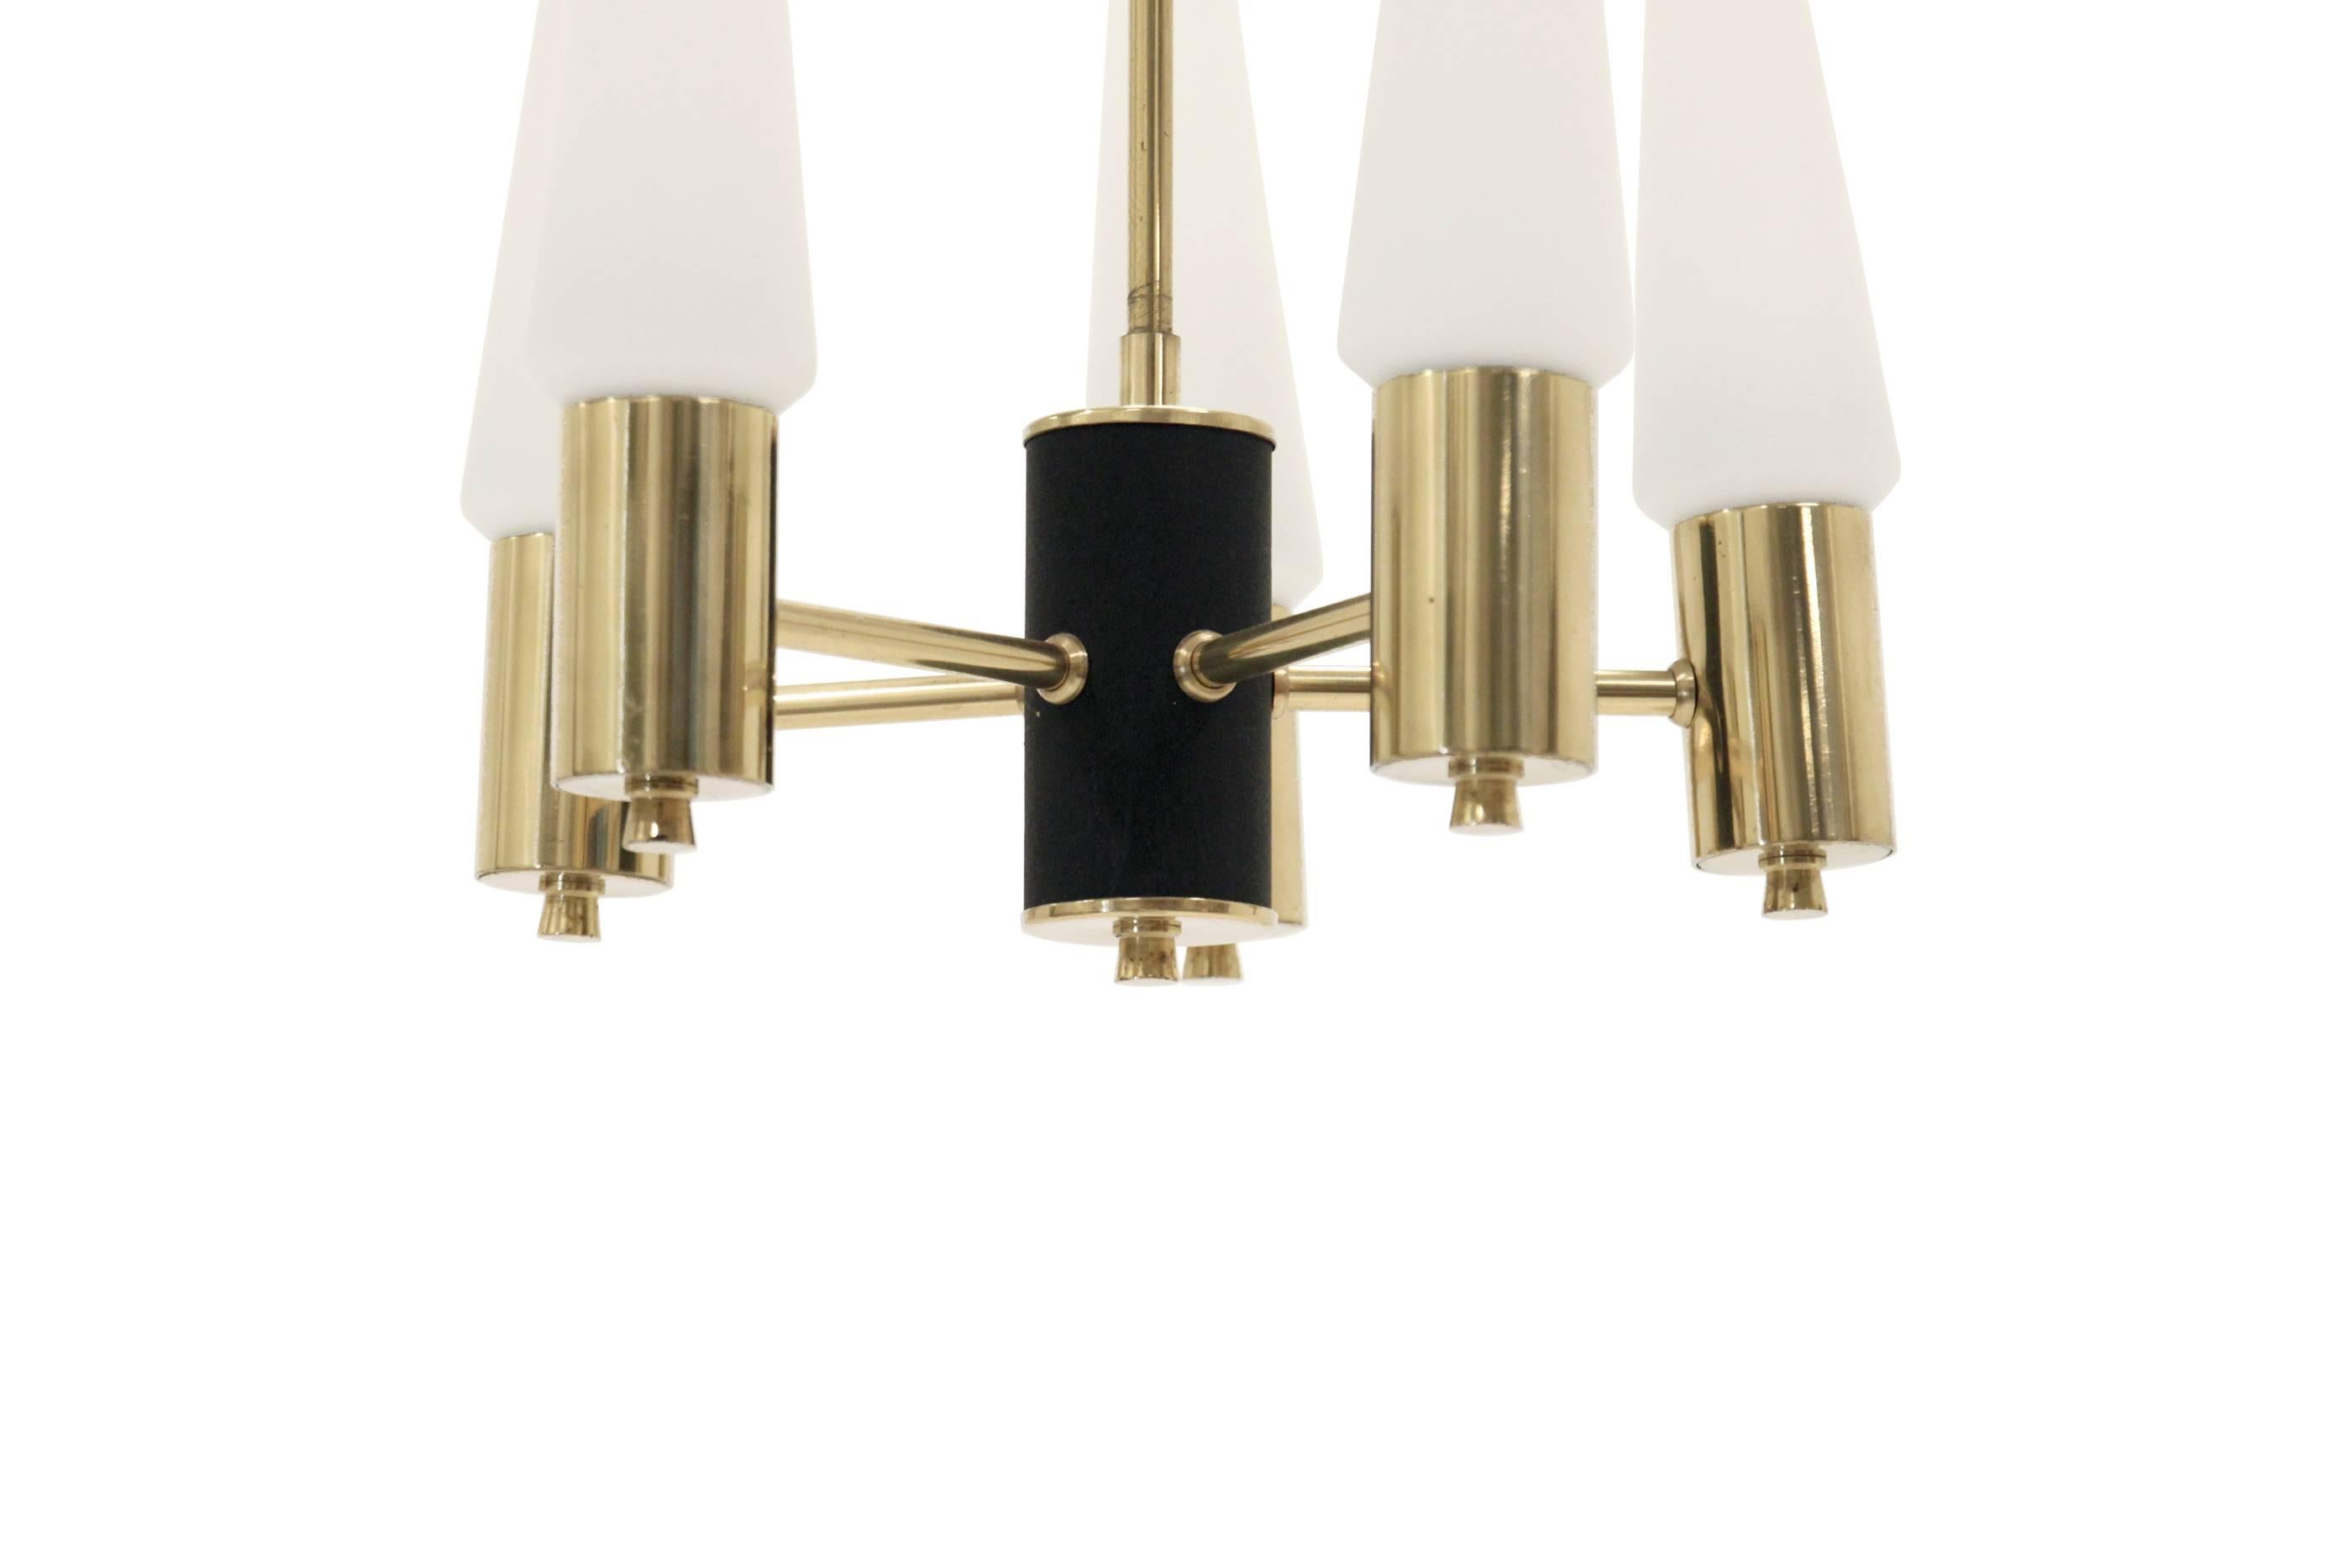 Sublime and refreshing five-armed chandelier on a brass frame and five shades in opaline glass.

Most likely designed and made in Sweden by Hans-Agne Jakobsson circa 1960s second half.

The lamp is fully working and superb vintage condition.